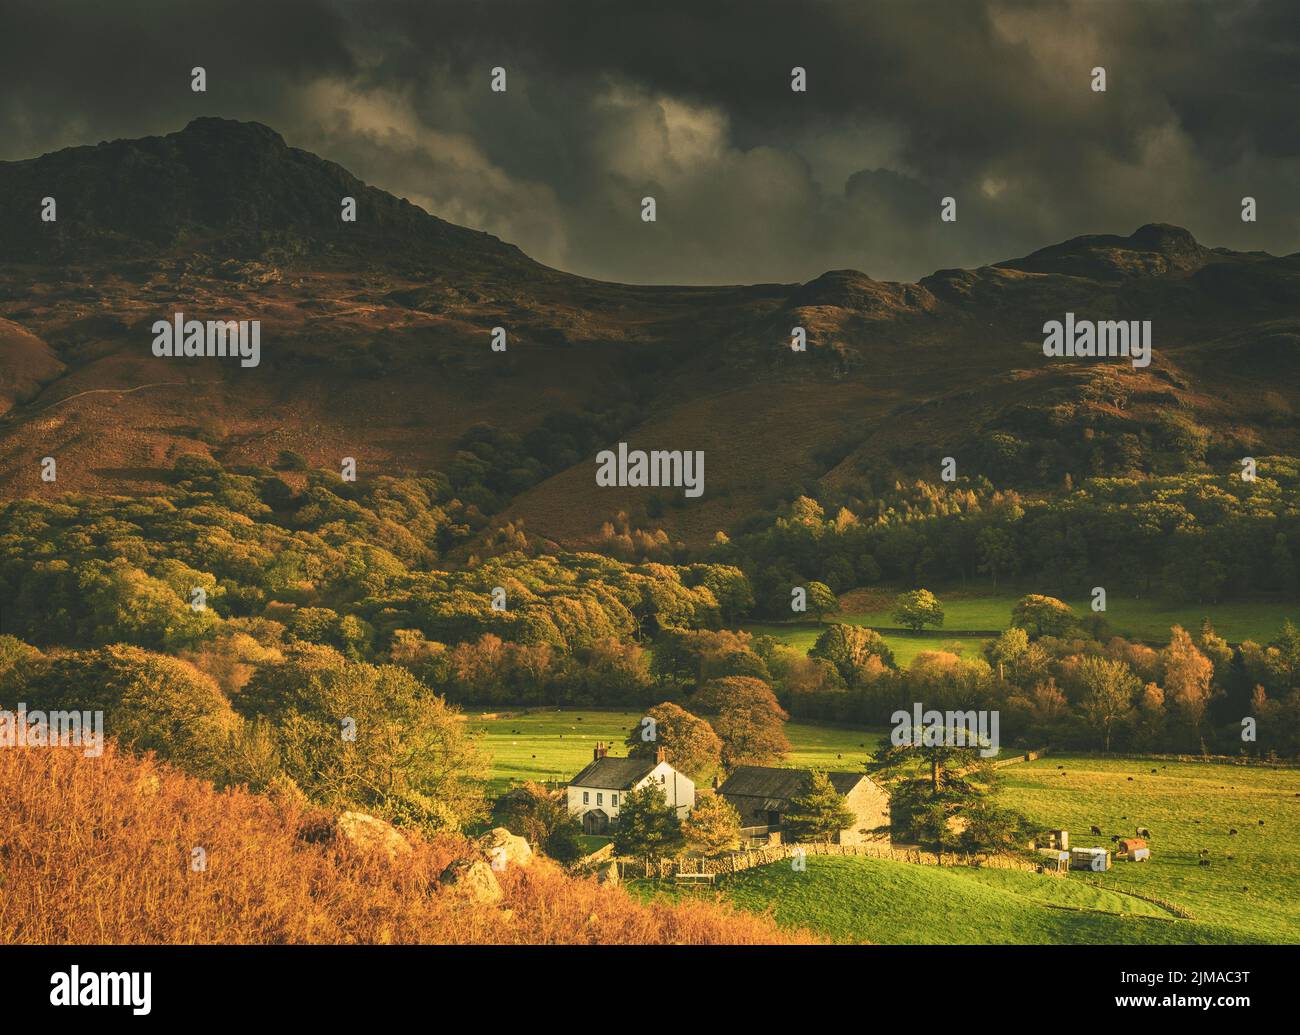 Wha House Farm seen below Harter Fell in the Eskdale valley of the Lake District. Stock Photo